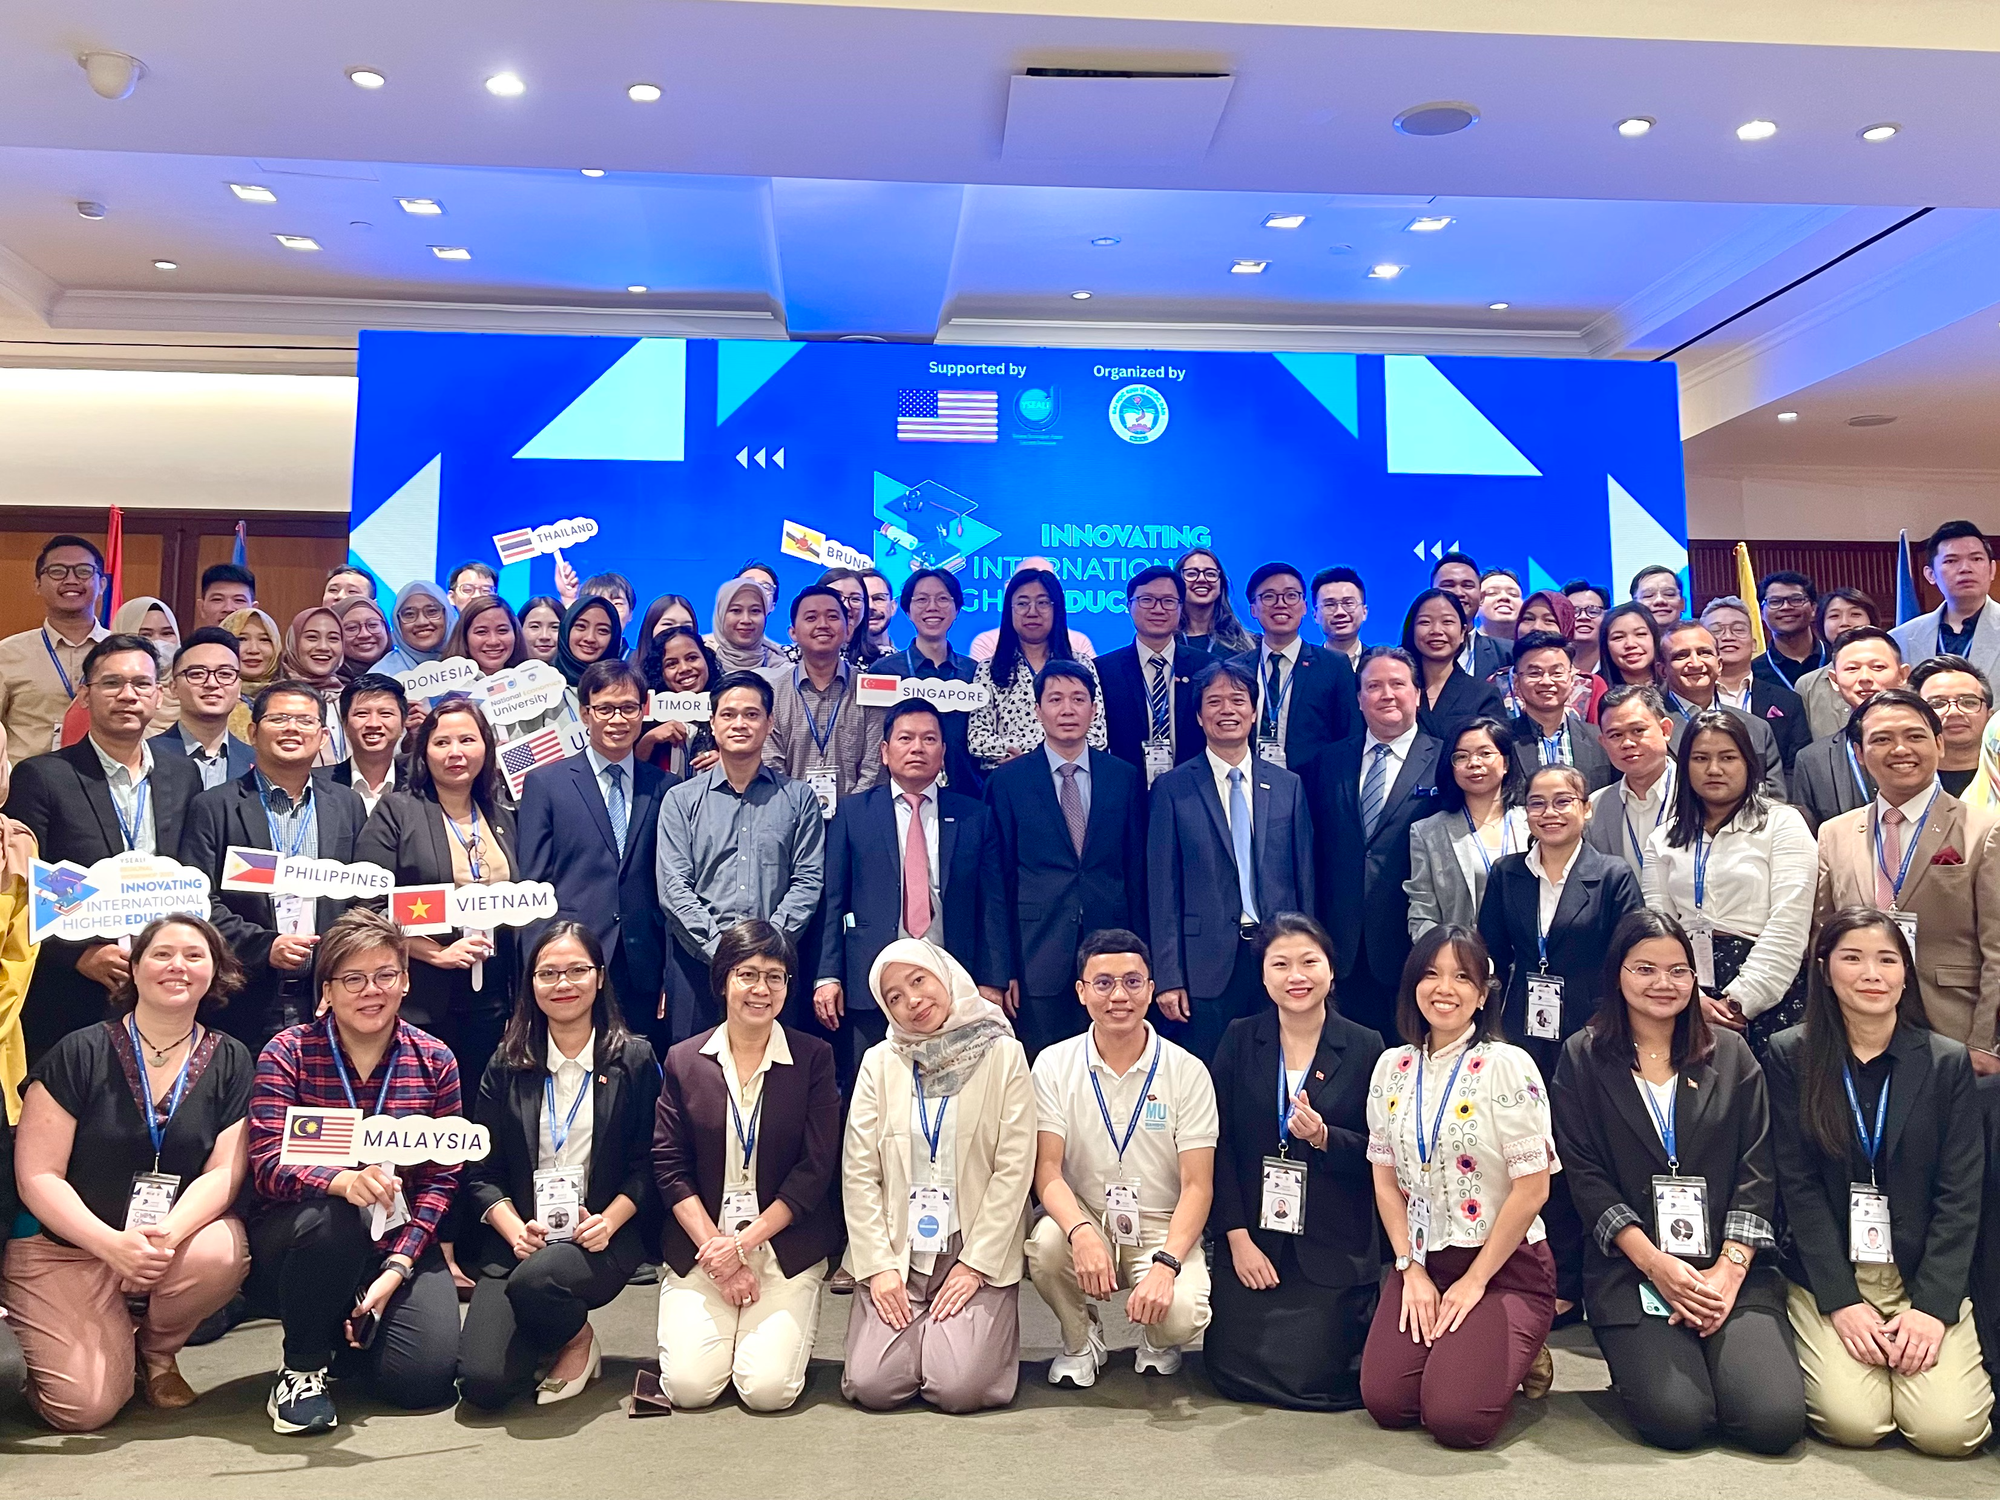 In Vietnam, 75 young Southeast Asian leaders seek to bolster innovative higher education